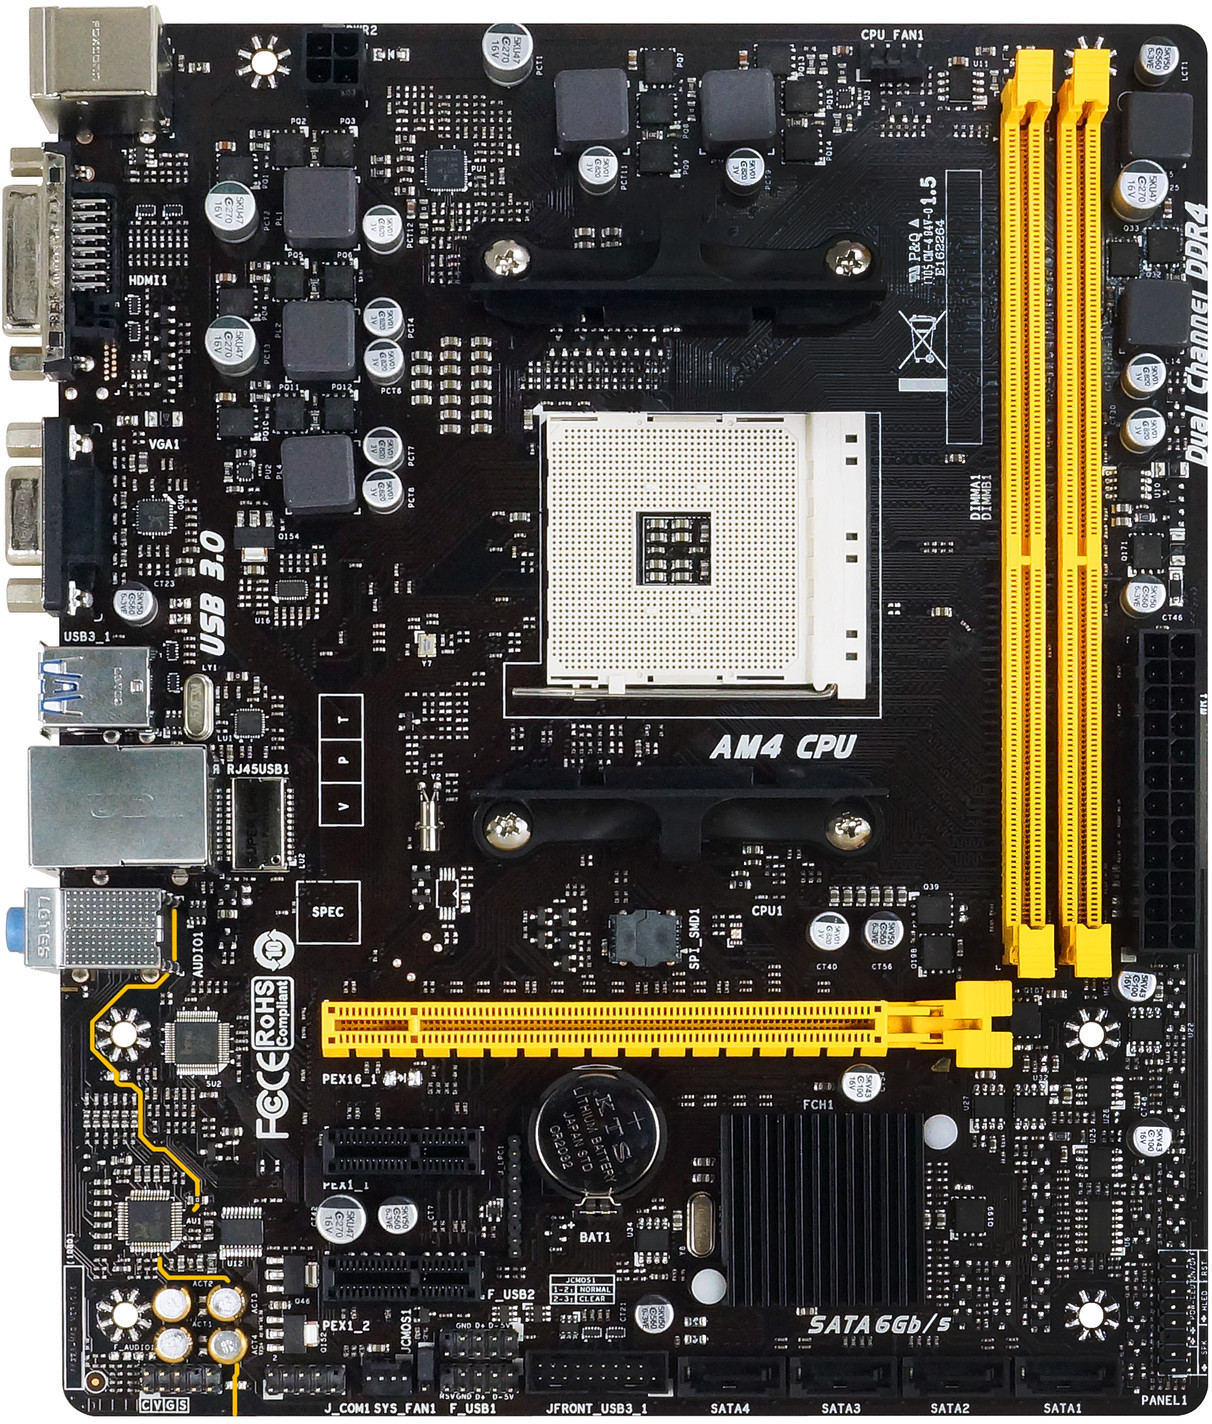 BIOSTAR Introduces A320 PRO Series of AM4 Motherboards | TechPowerUp